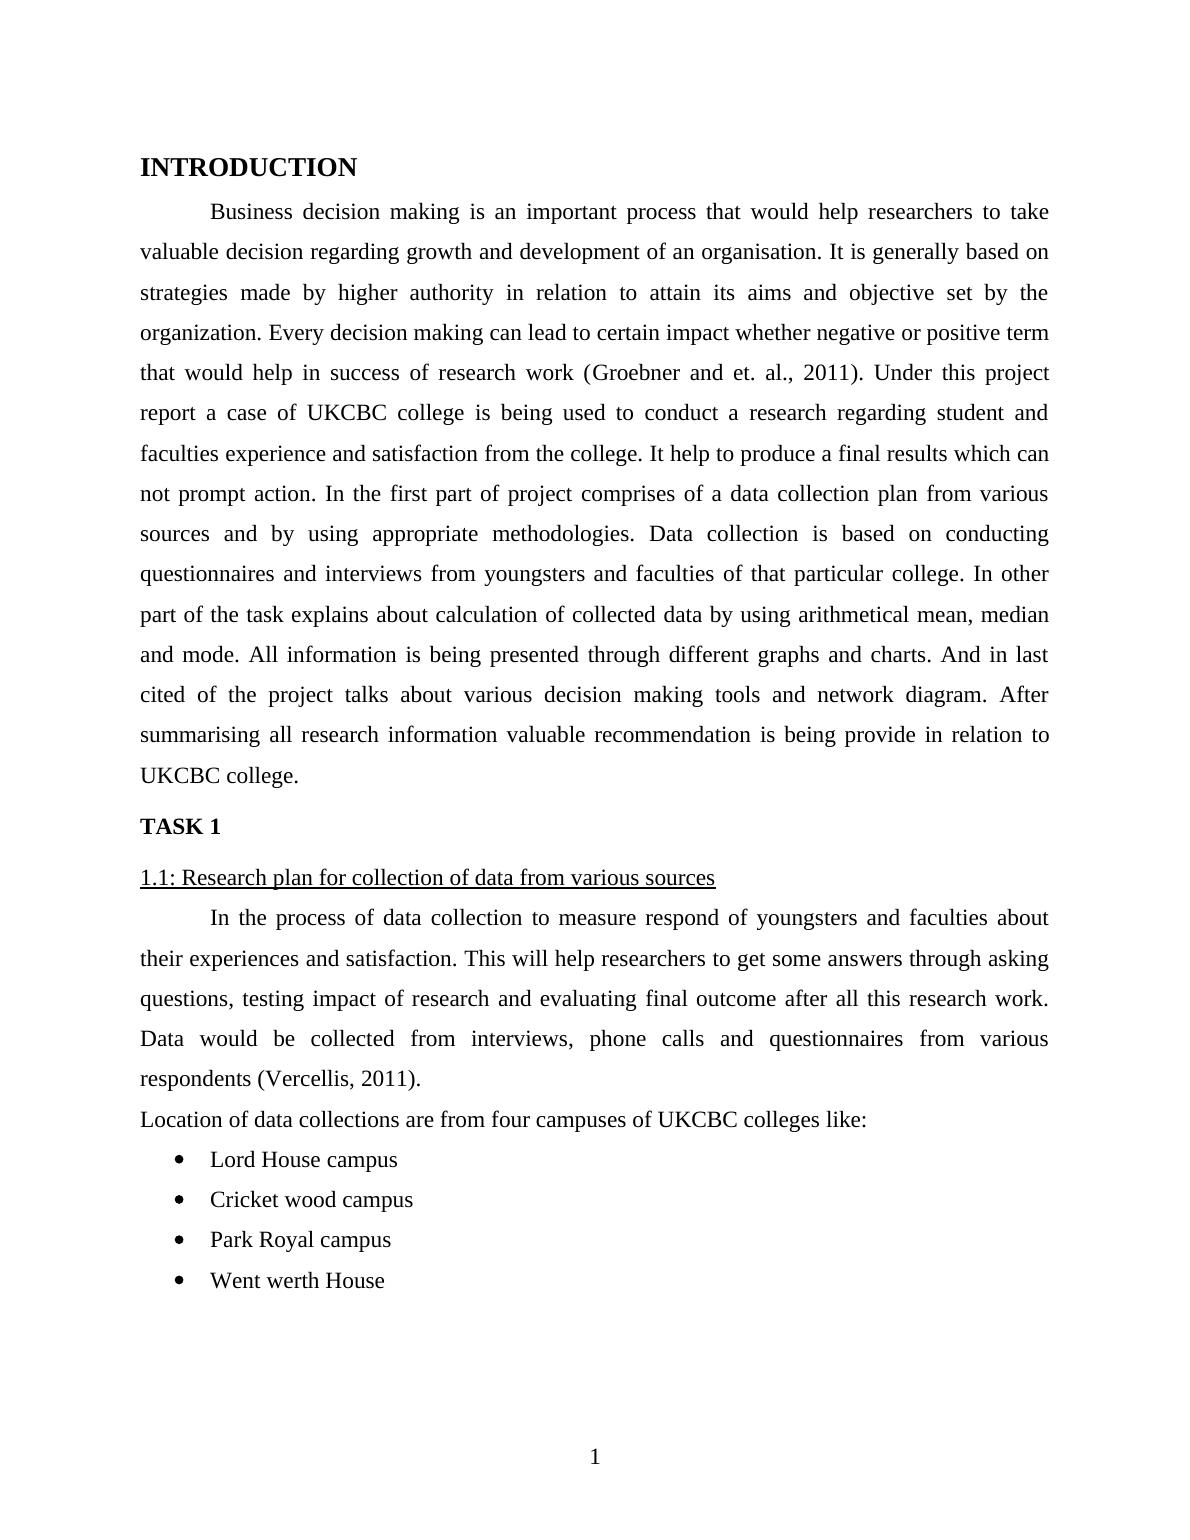 Project Report on UKCBC college_3